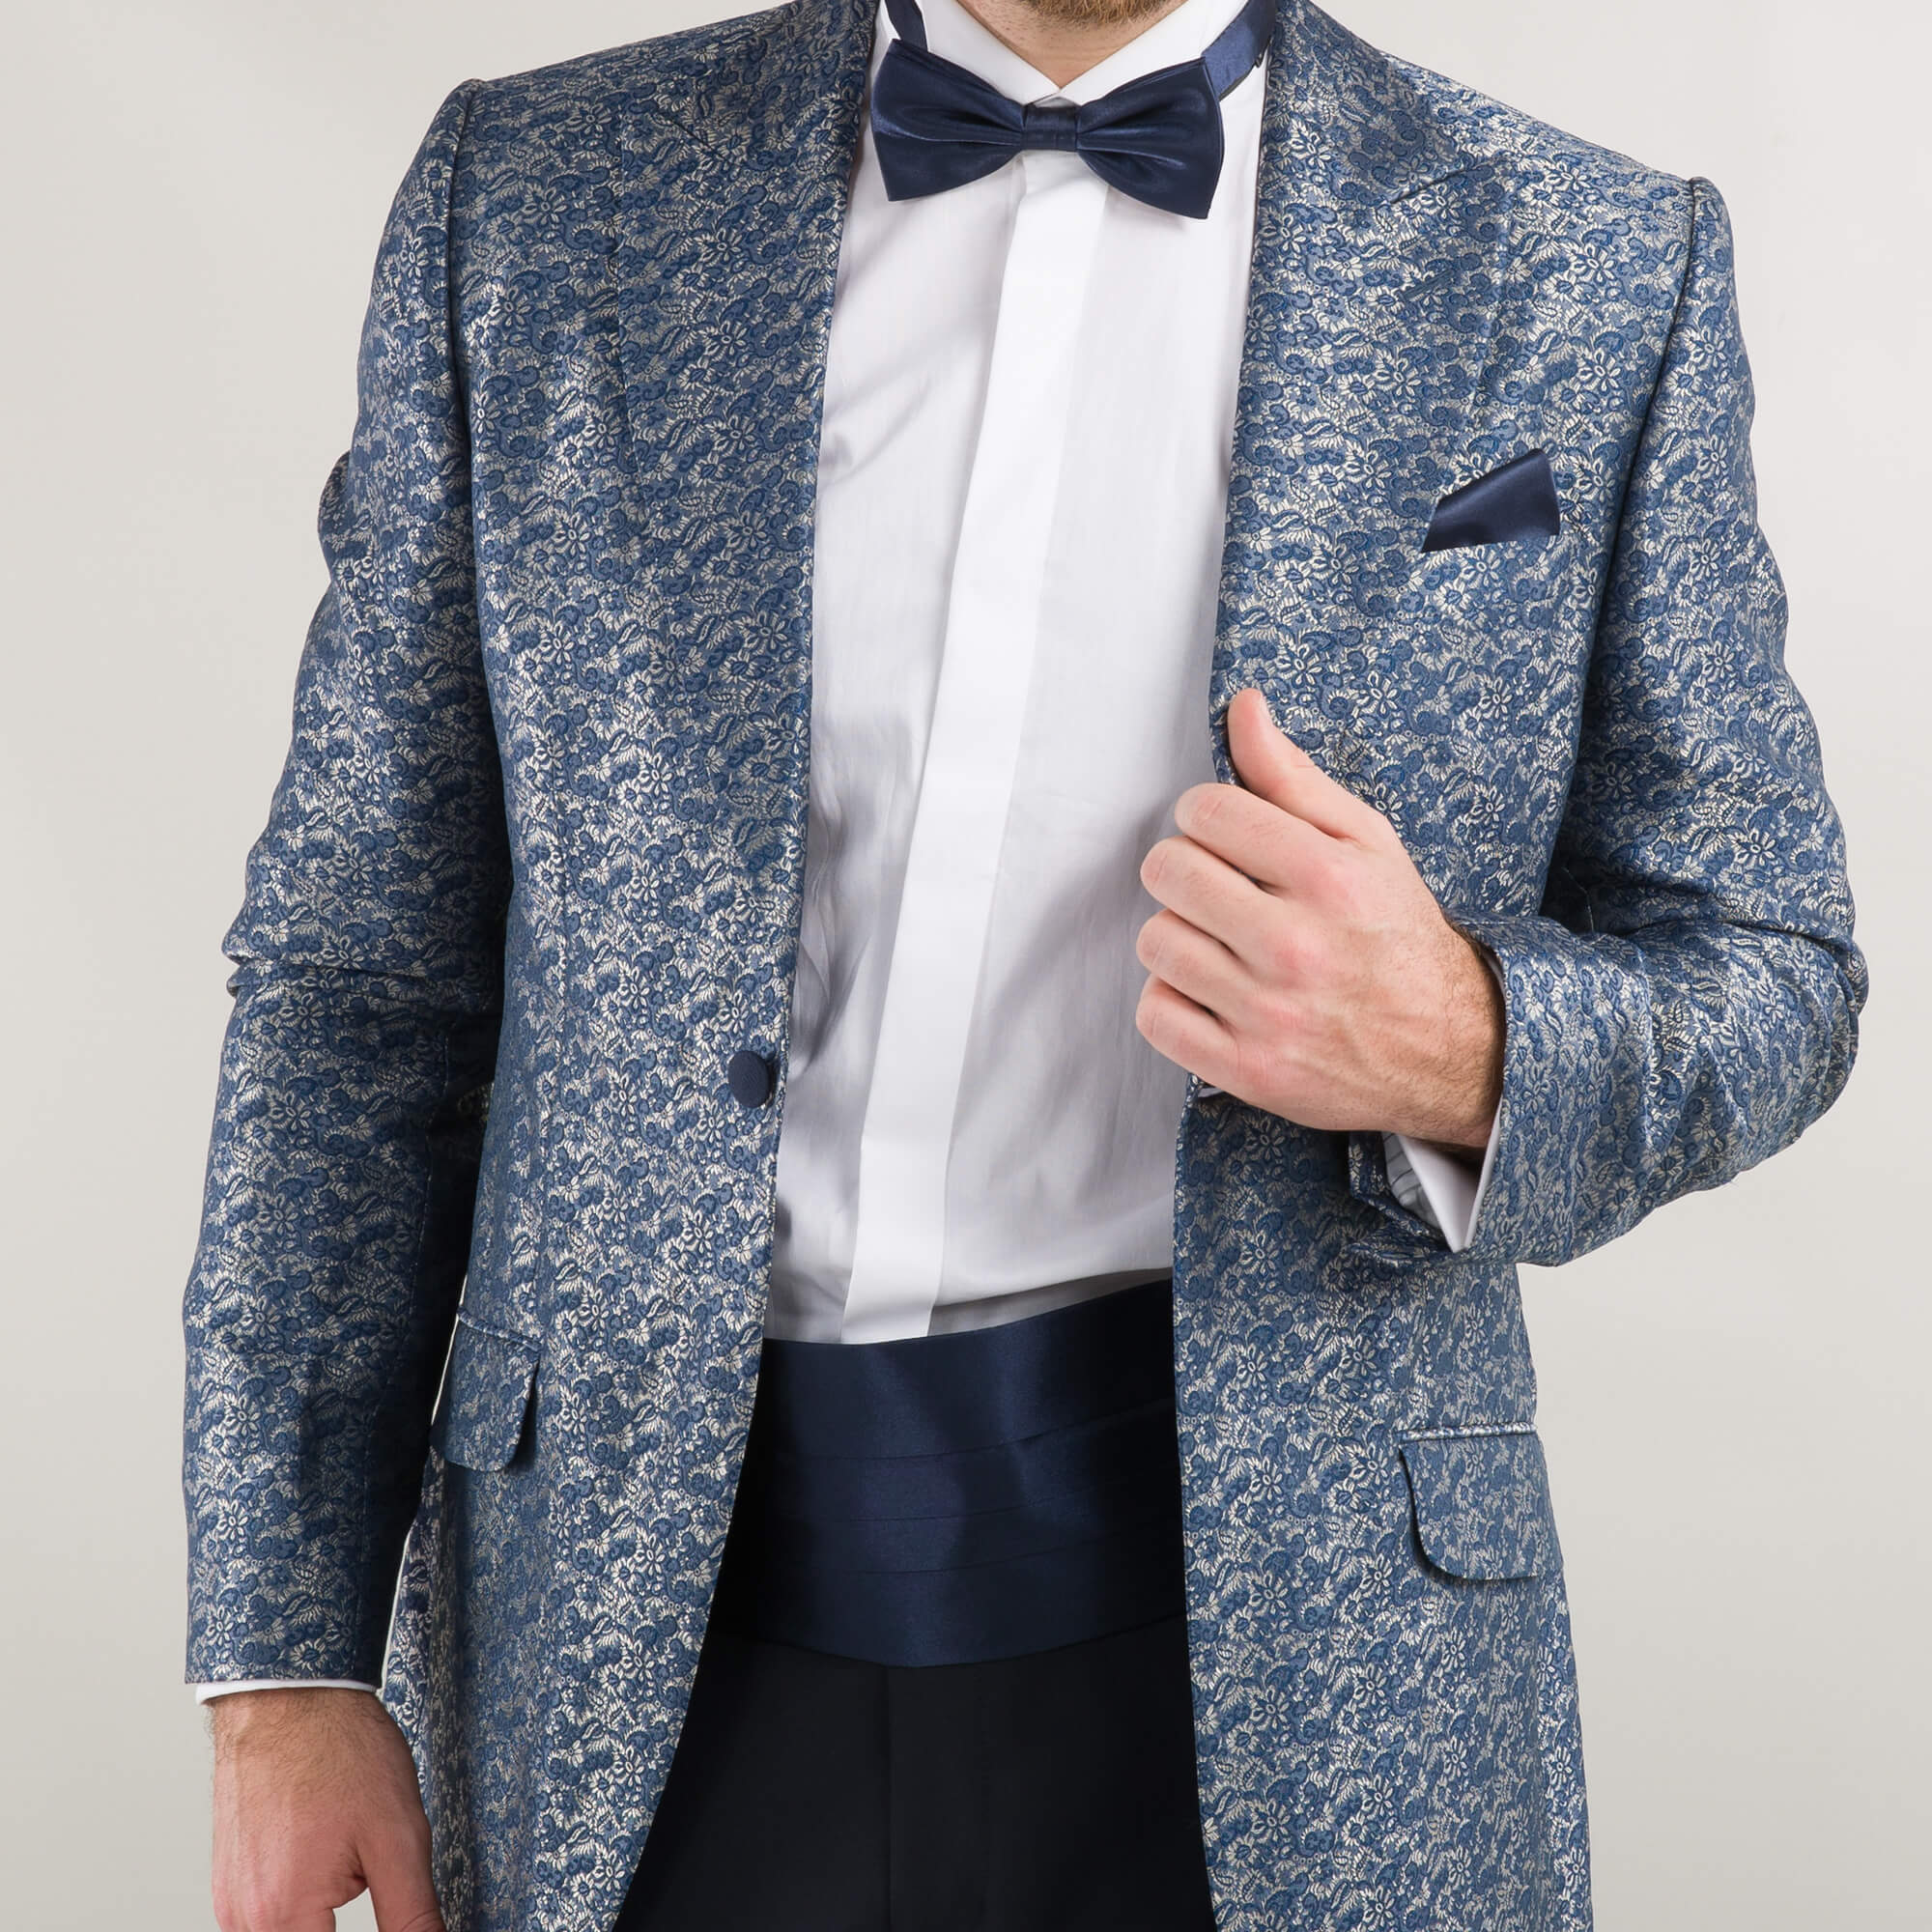 Blue and Silver Floral Evening Jacket